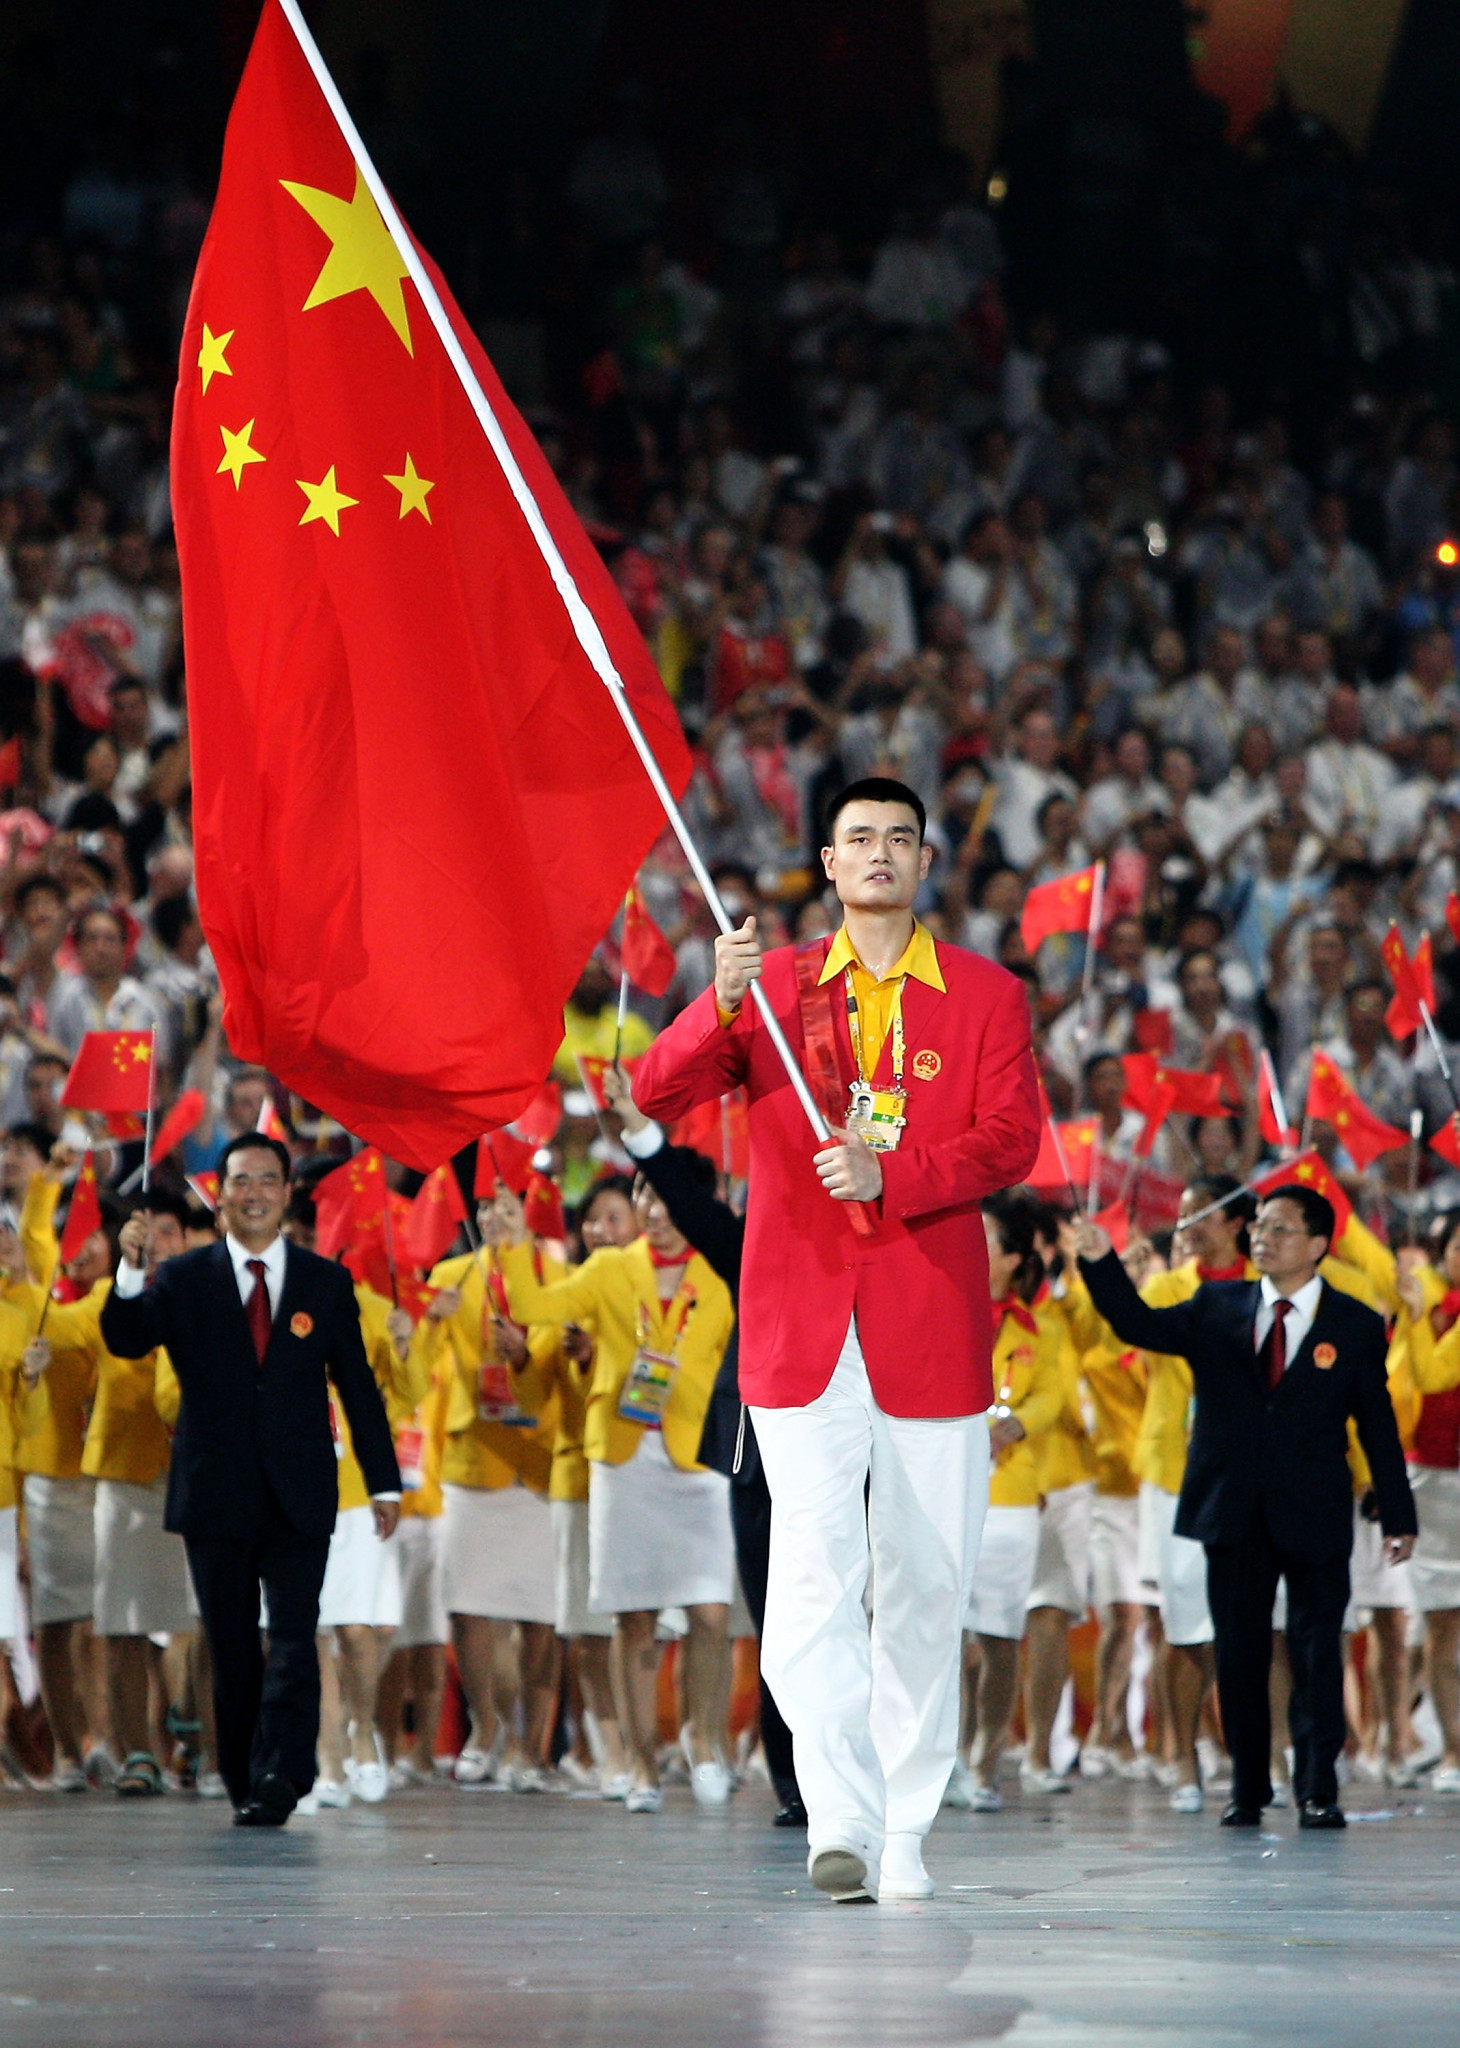 Basketball player Yao Ming carried China's flag at the Opening Ceremony of Beijing 2008 ©Getty Images